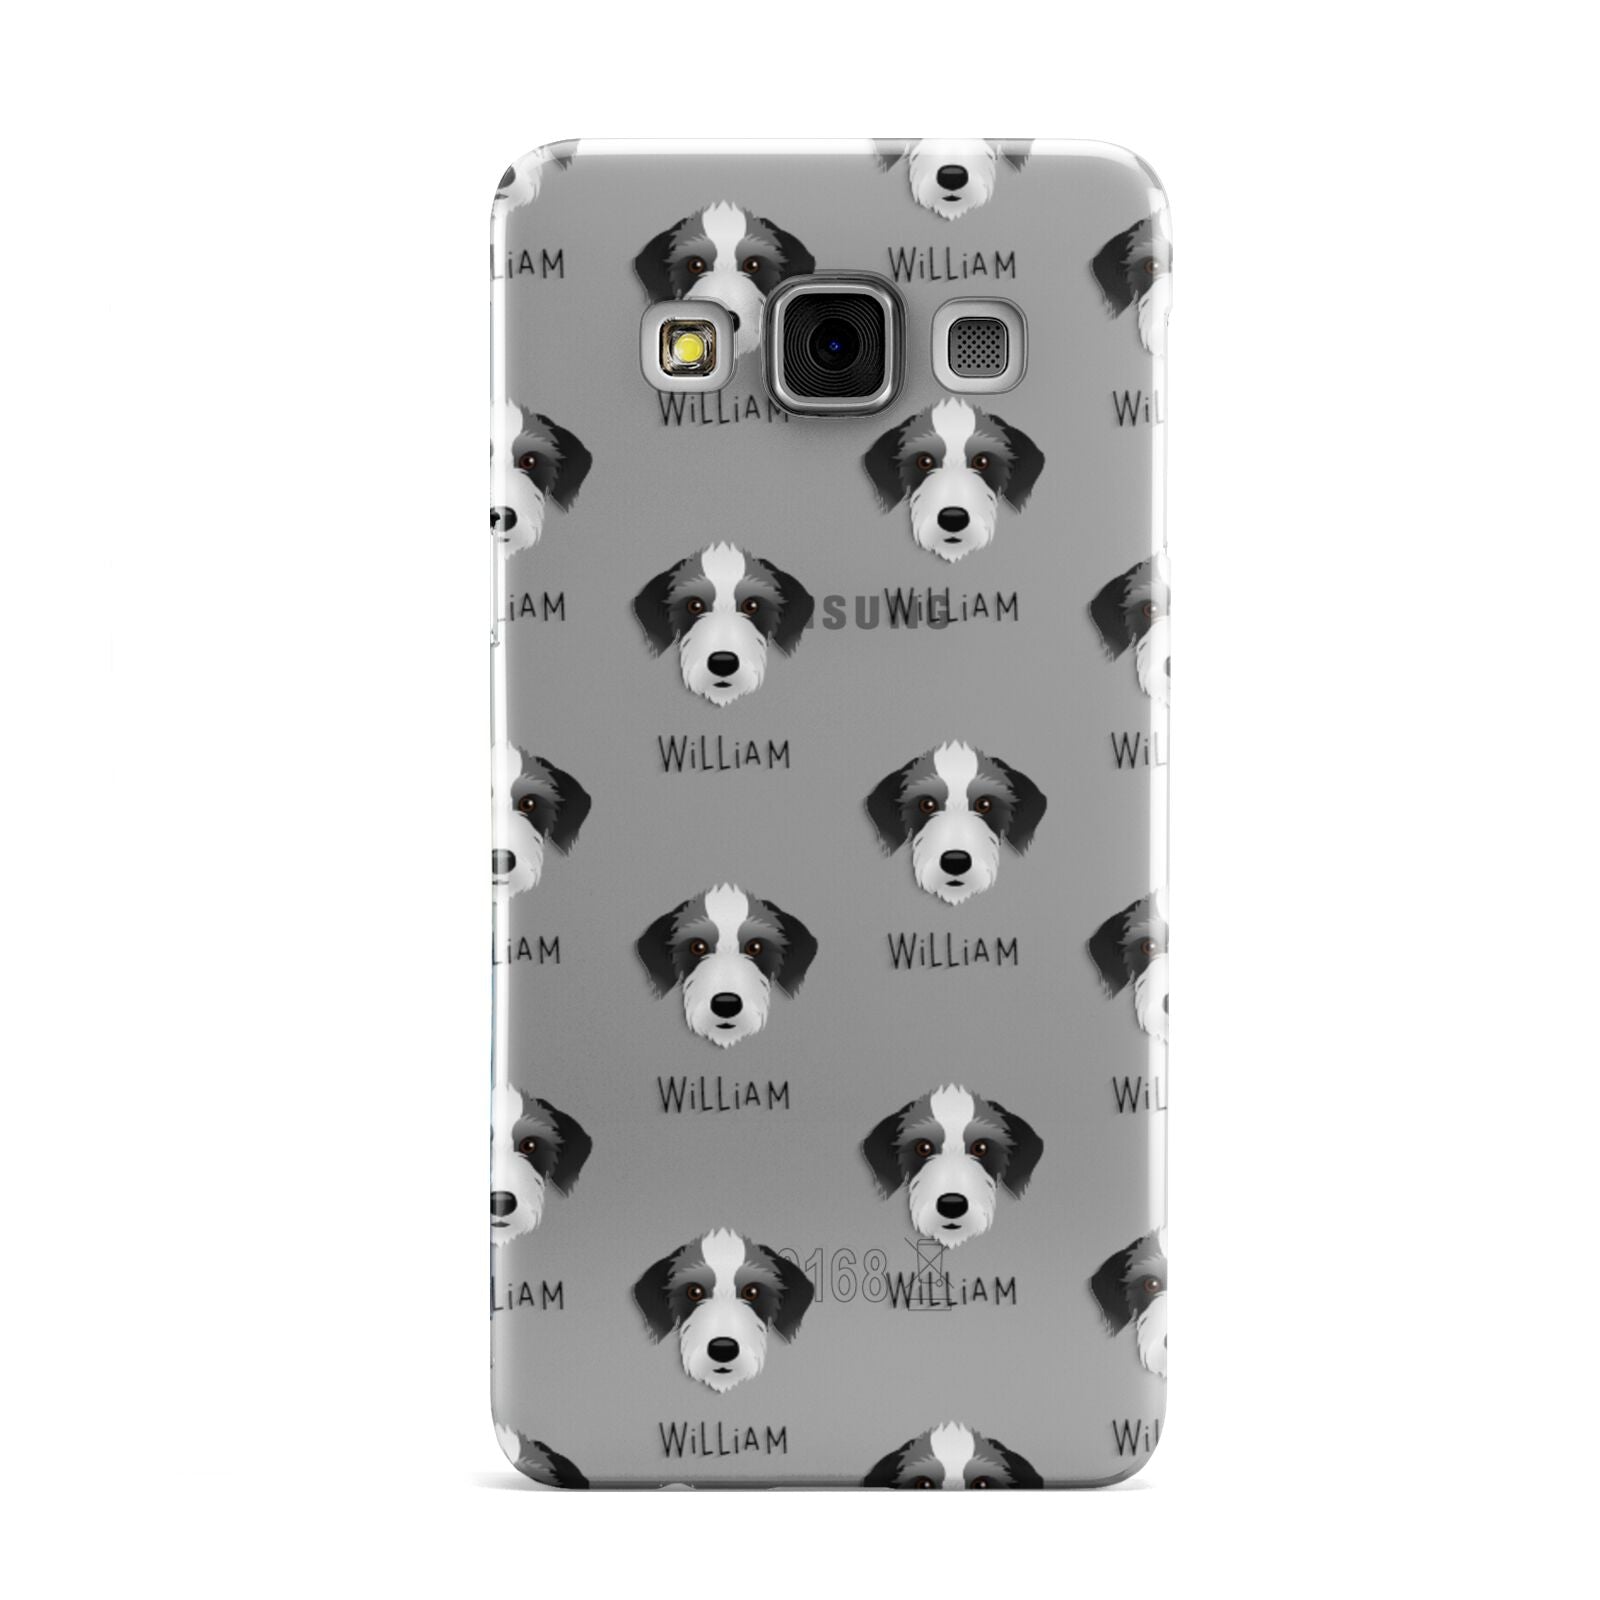 Bedlington Whippet Icon with Name Samsung Galaxy A3 Case